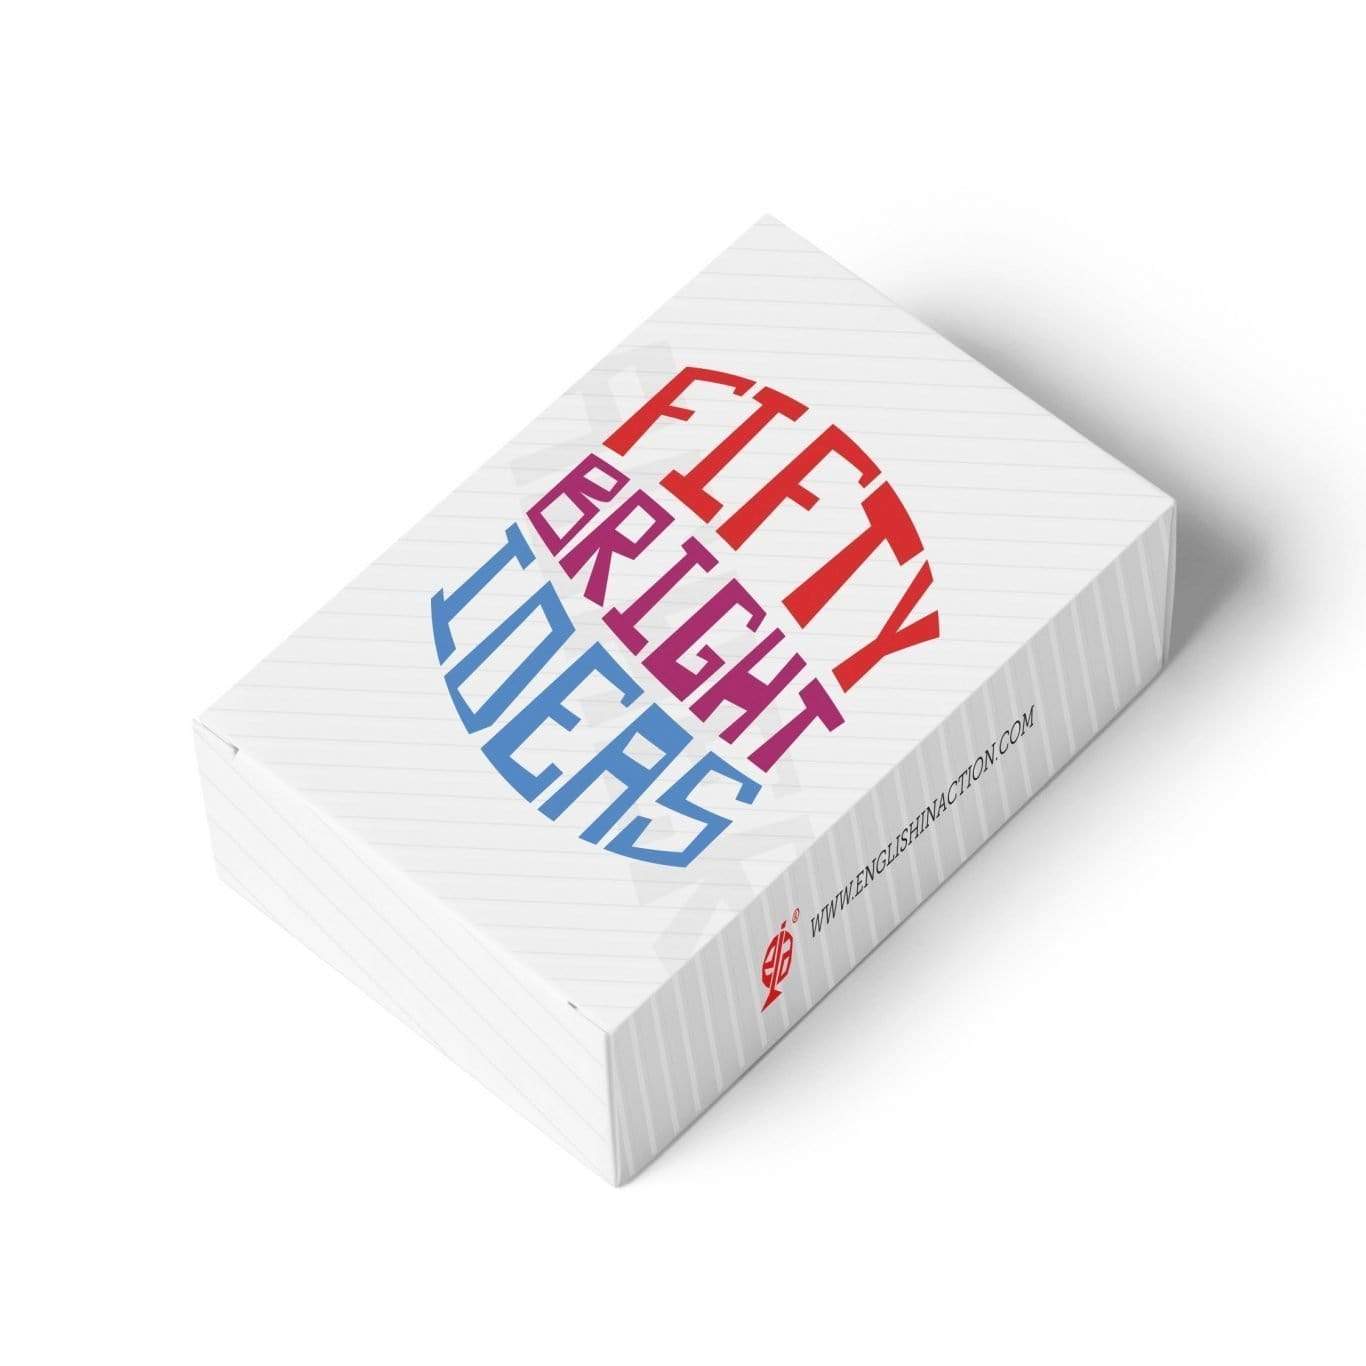 Fifty Bright Ideas - Card Pack - Teacher-Toolkit.co.uk